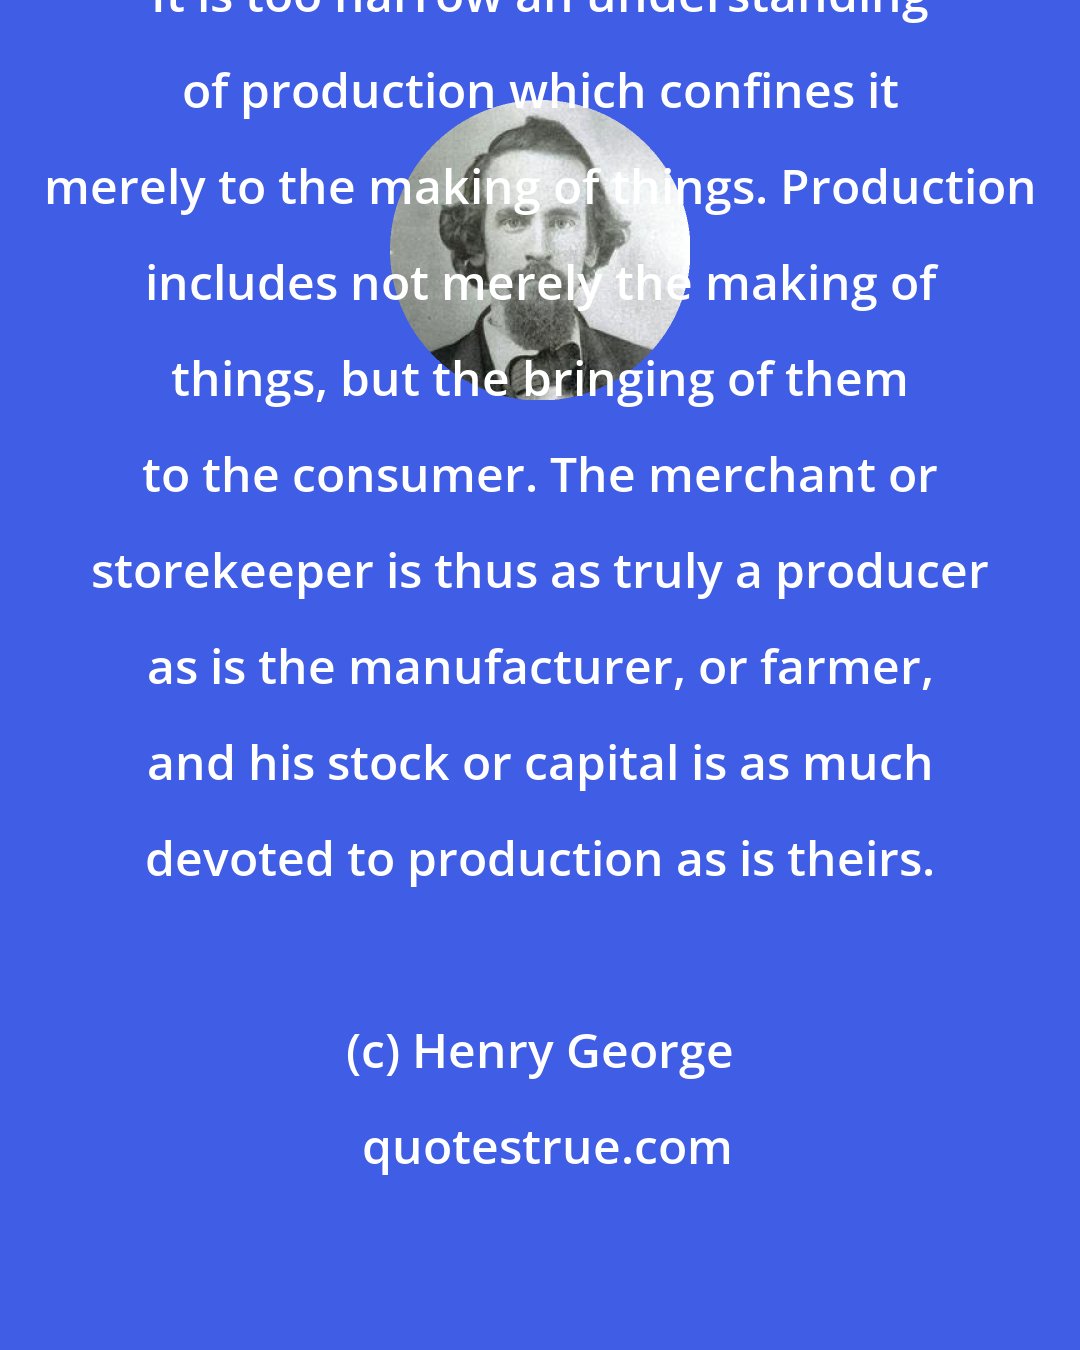 Henry George: It is too narrow an understanding of production which confines it merely to the making of things. Production includes not merely the making of things, but the bringing of them to the consumer. The merchant or storekeeper is thus as truly a producer as is the manufacturer, or farmer, and his stock or capital is as much devoted to production as is theirs.